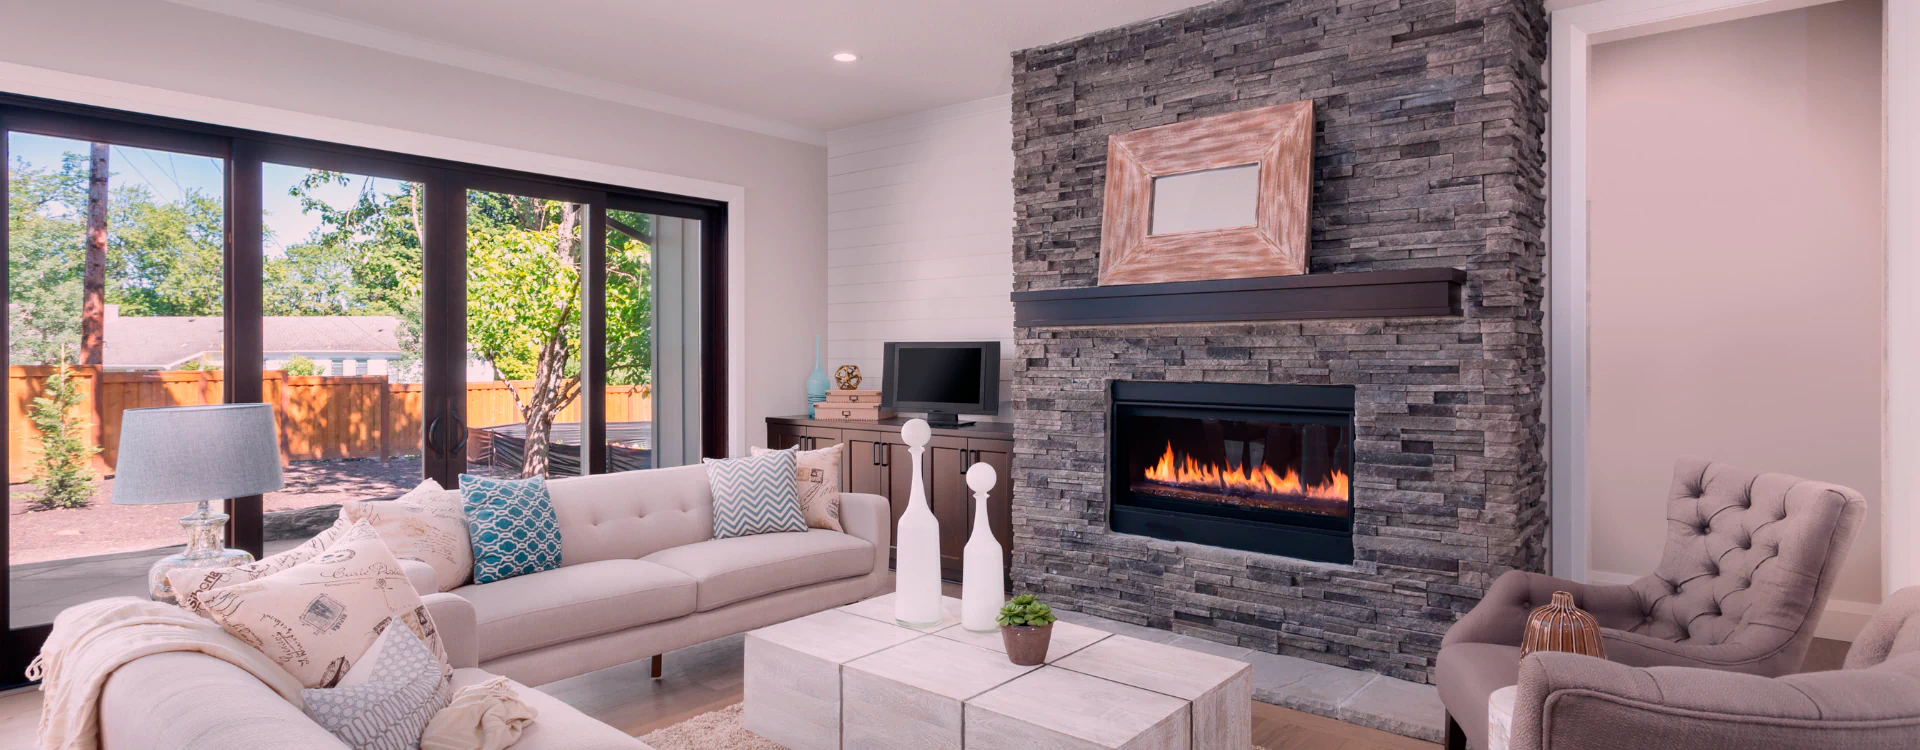 luxury living room with chimney